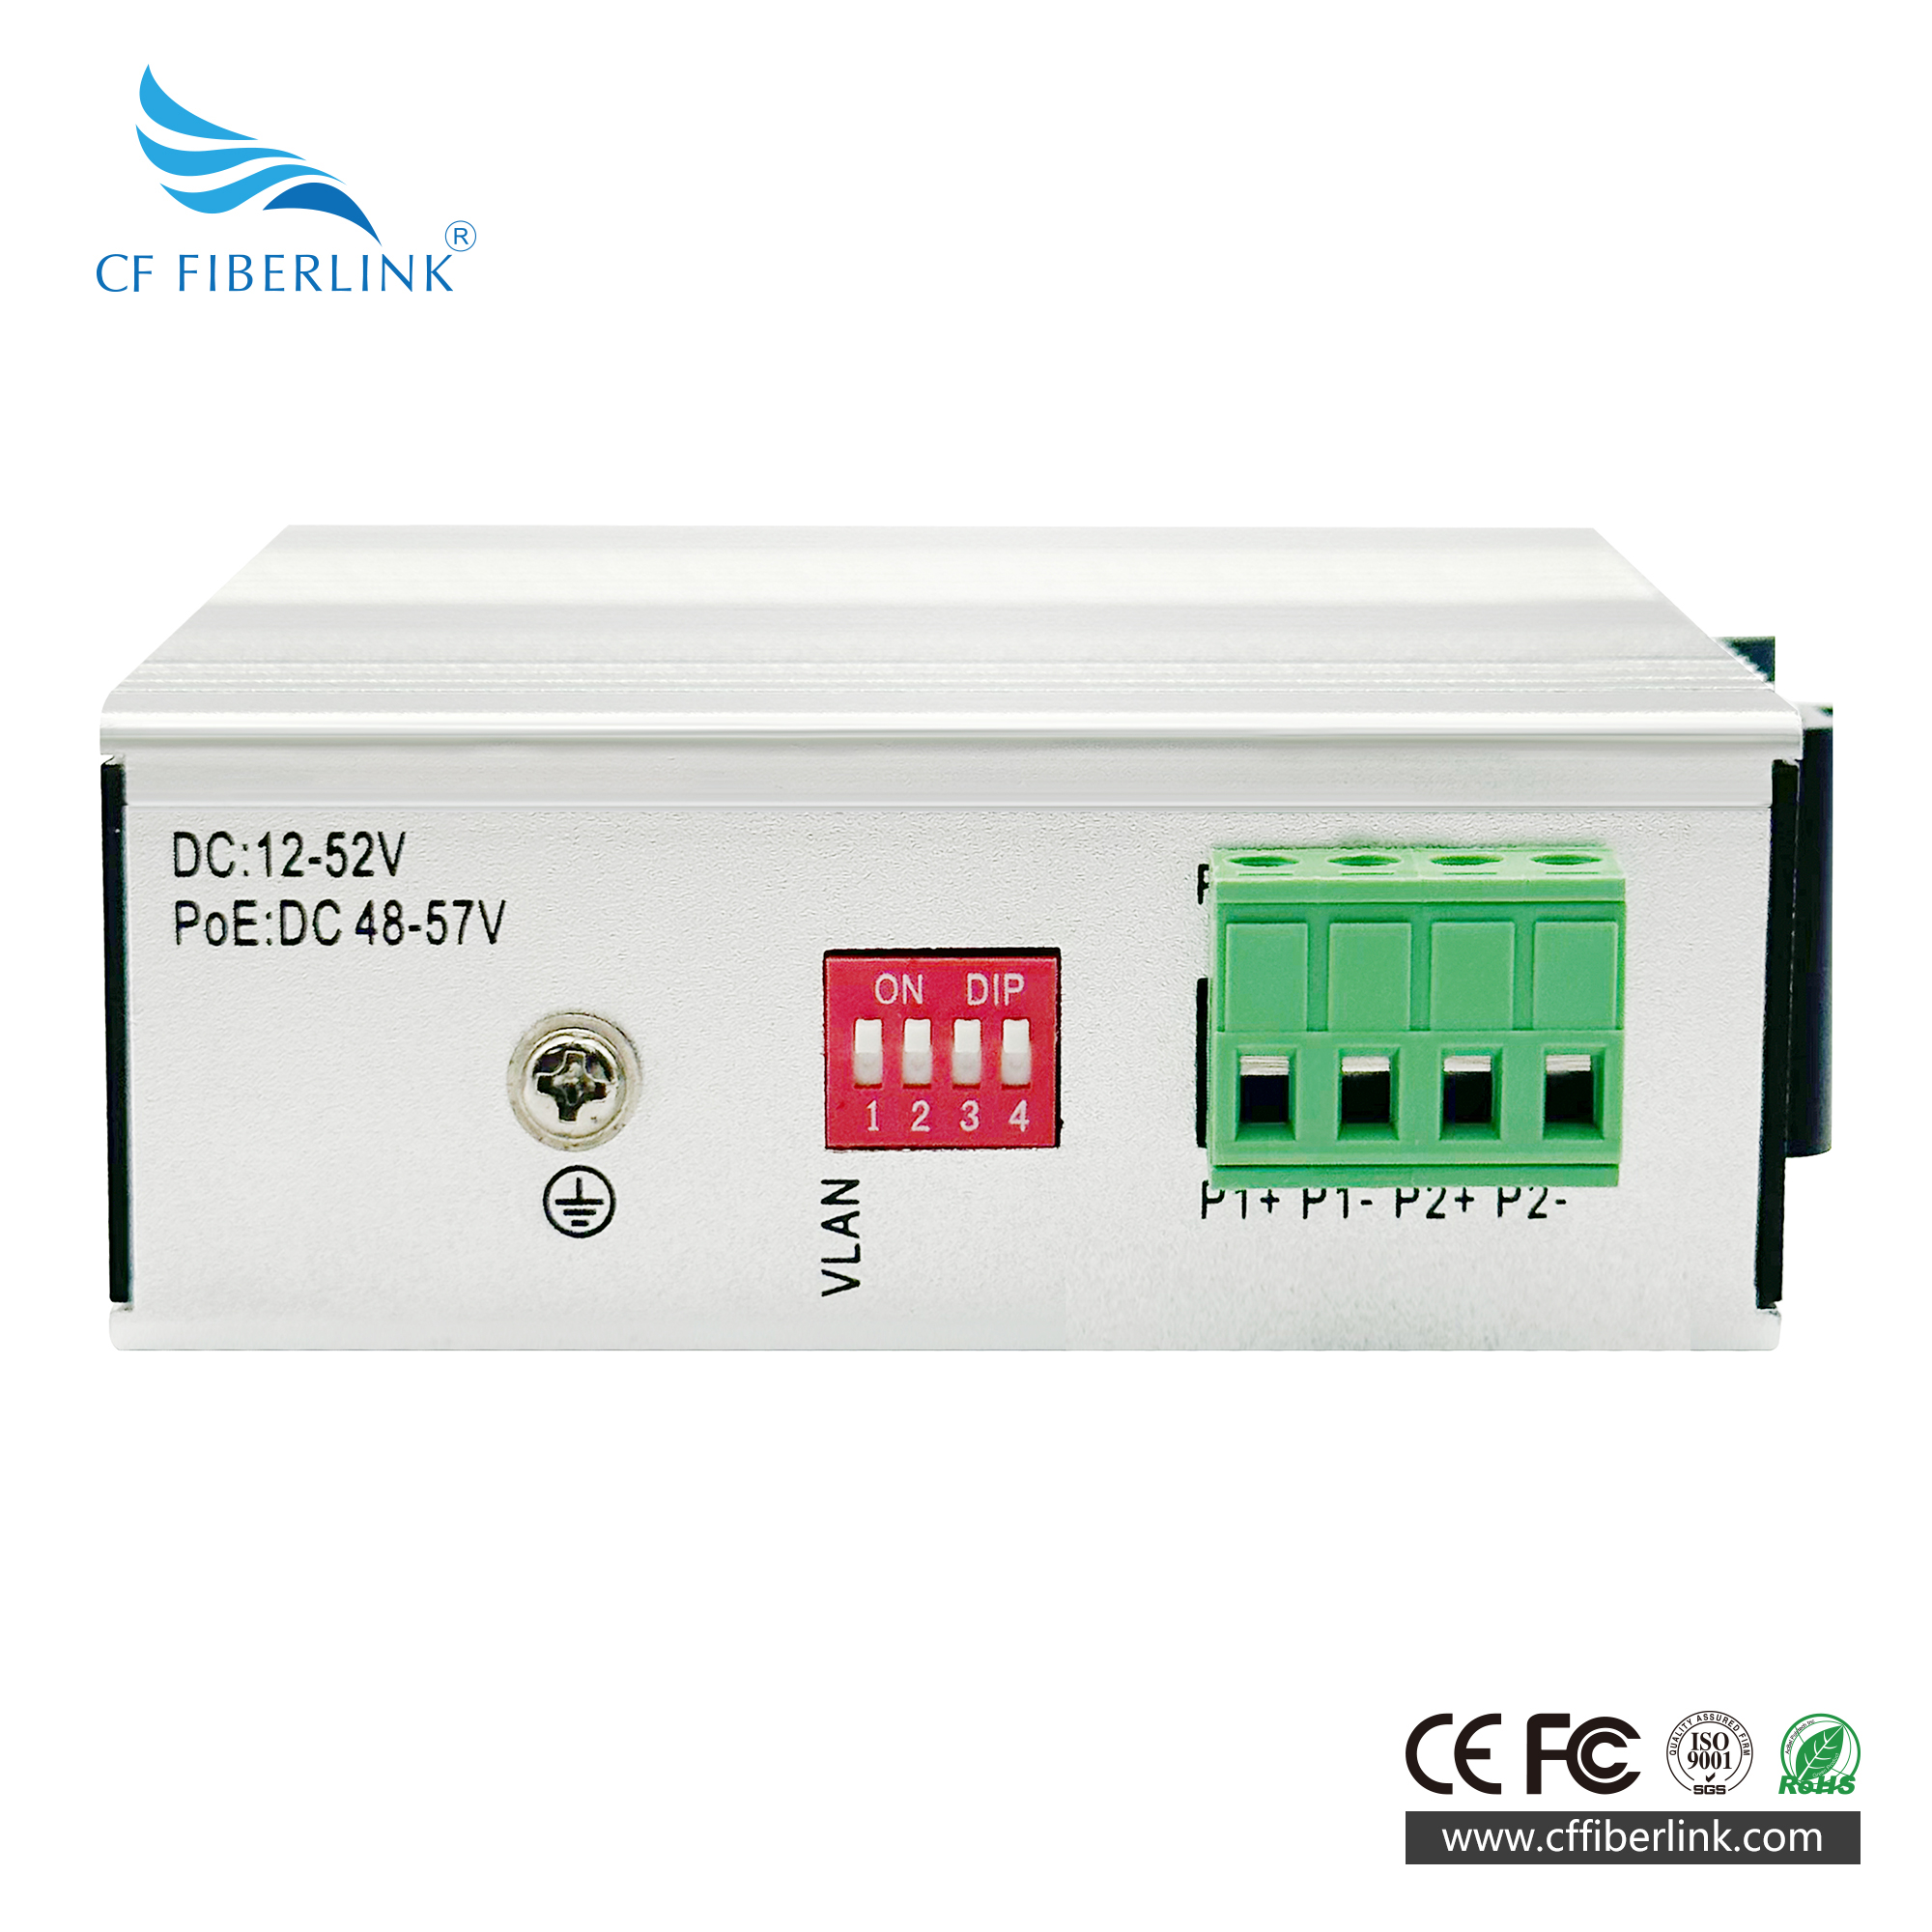 5-port 10/100/1000M Industrial Ethernet  Switch